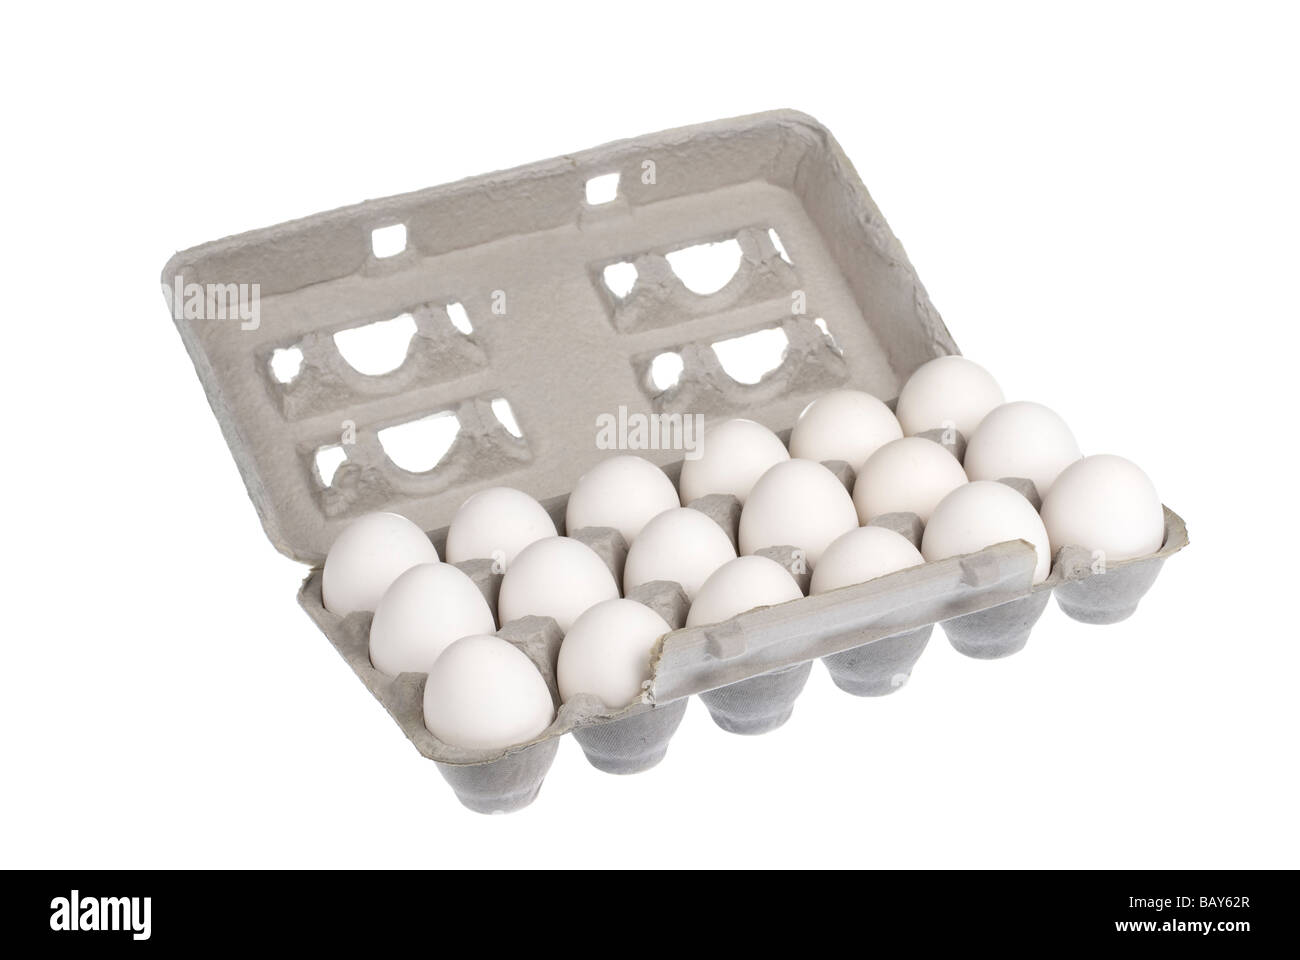 An 18 egg crate with white eggs isolated on a white background Image was shot on a light table and is not a cutout Stock Photo